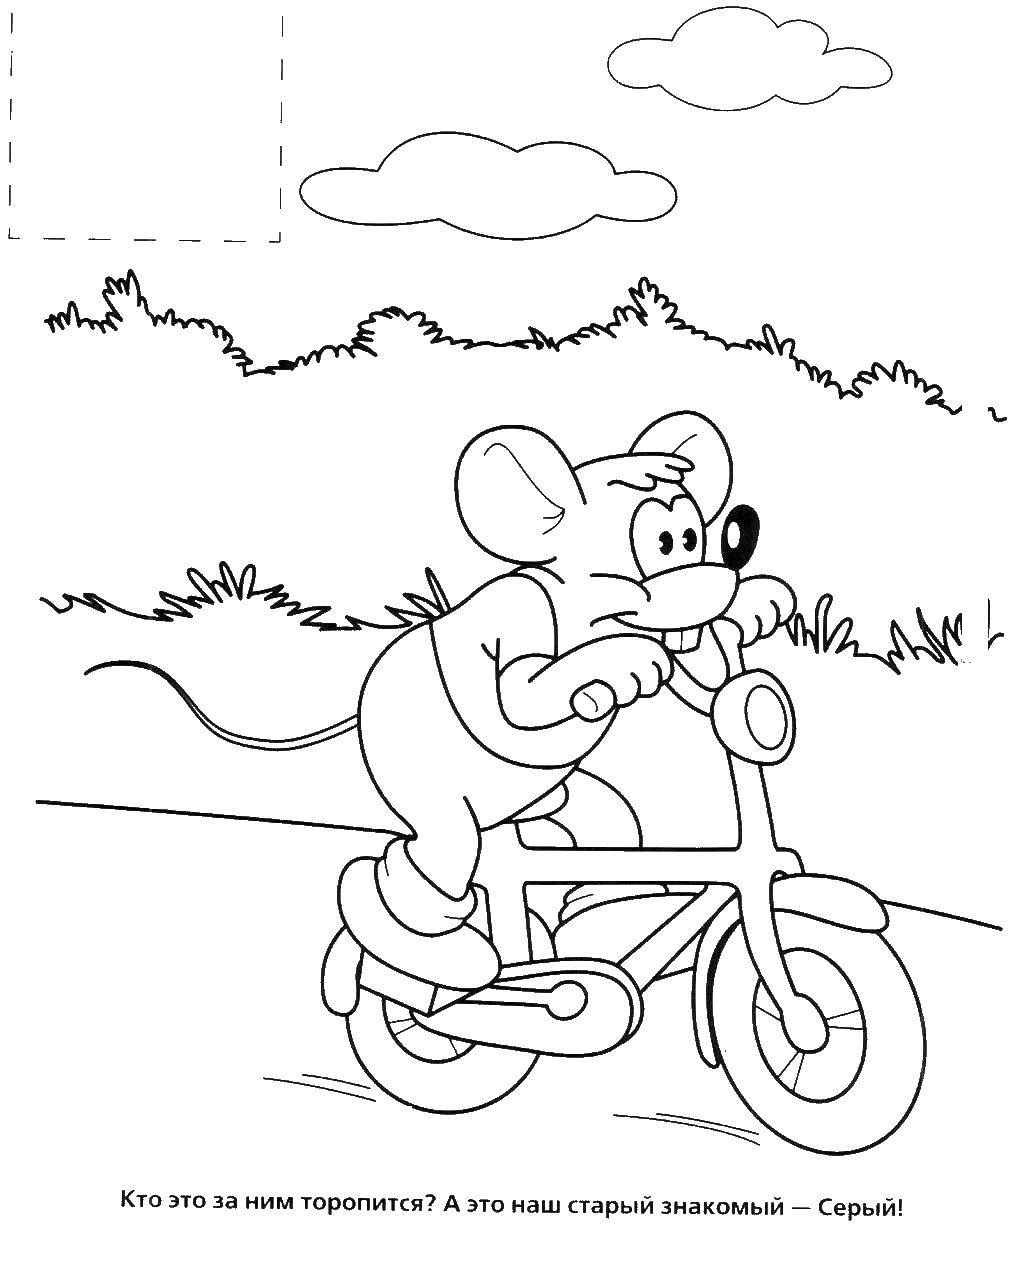 Coloring The mouse riding a Bicycle. Category coloring cat Leopold. Tags:  the mouse, the cat, Leopold.